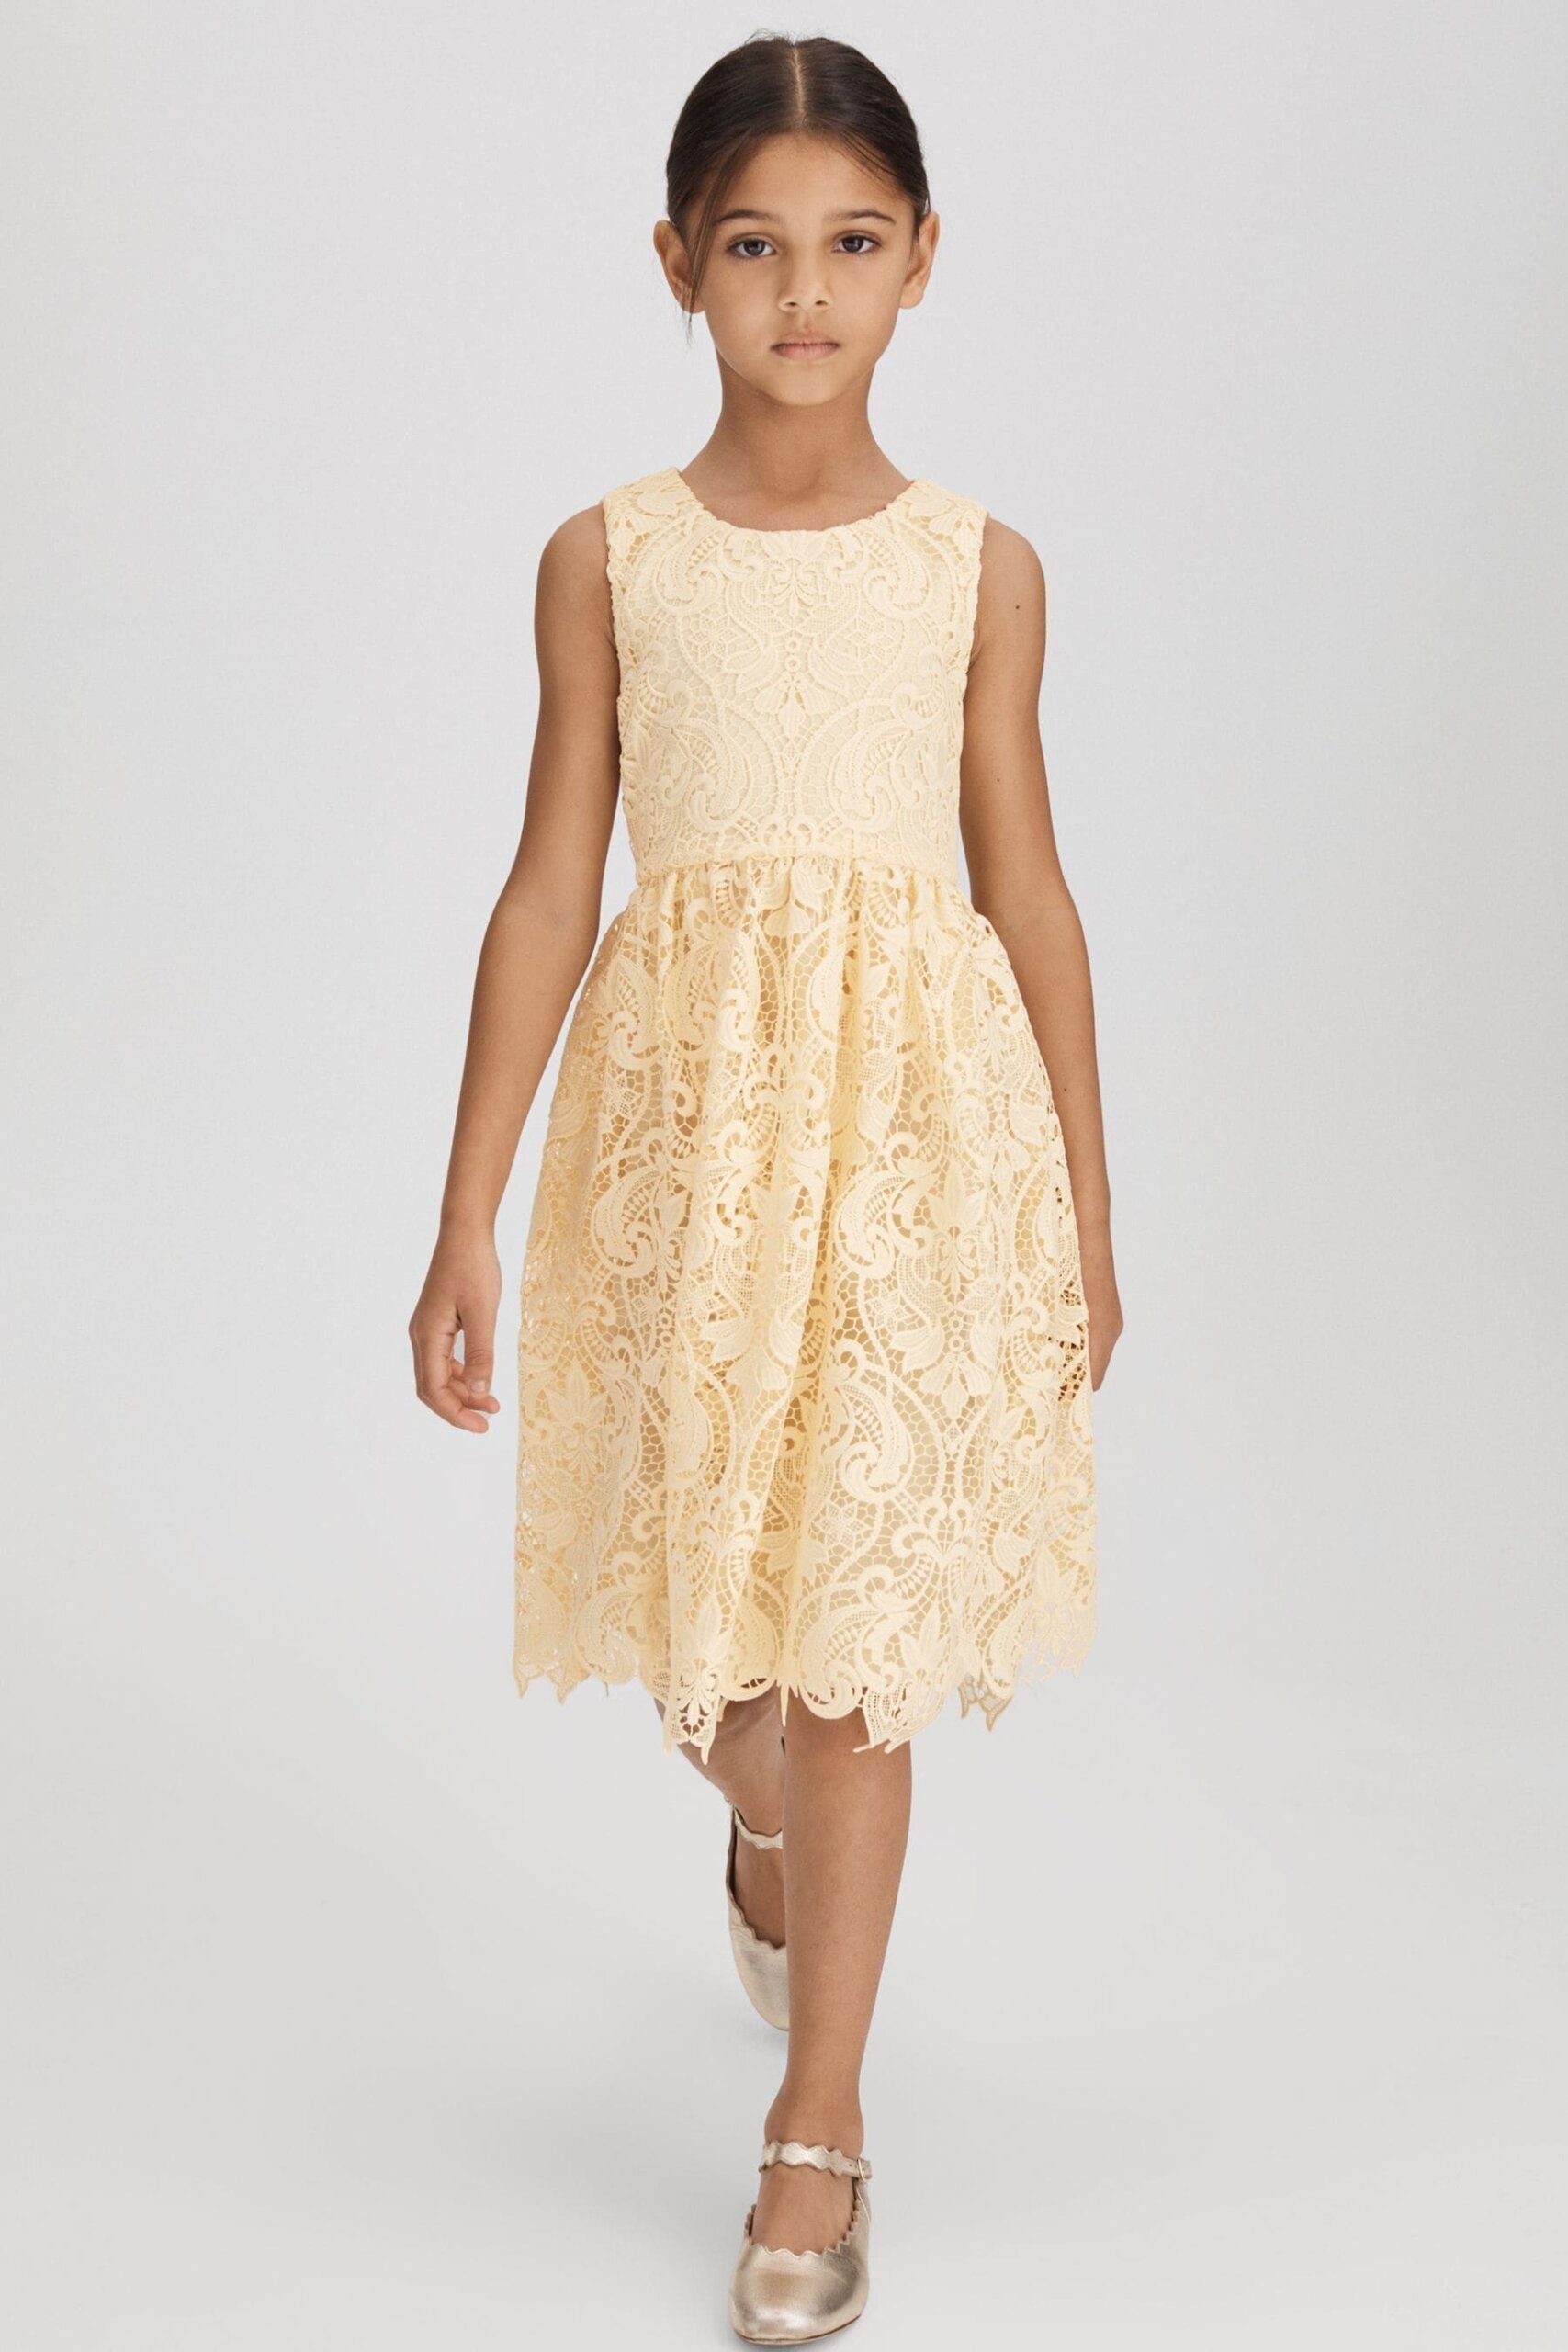 Daia - Lemon Teen Fit-and-Flare Lace Dress,